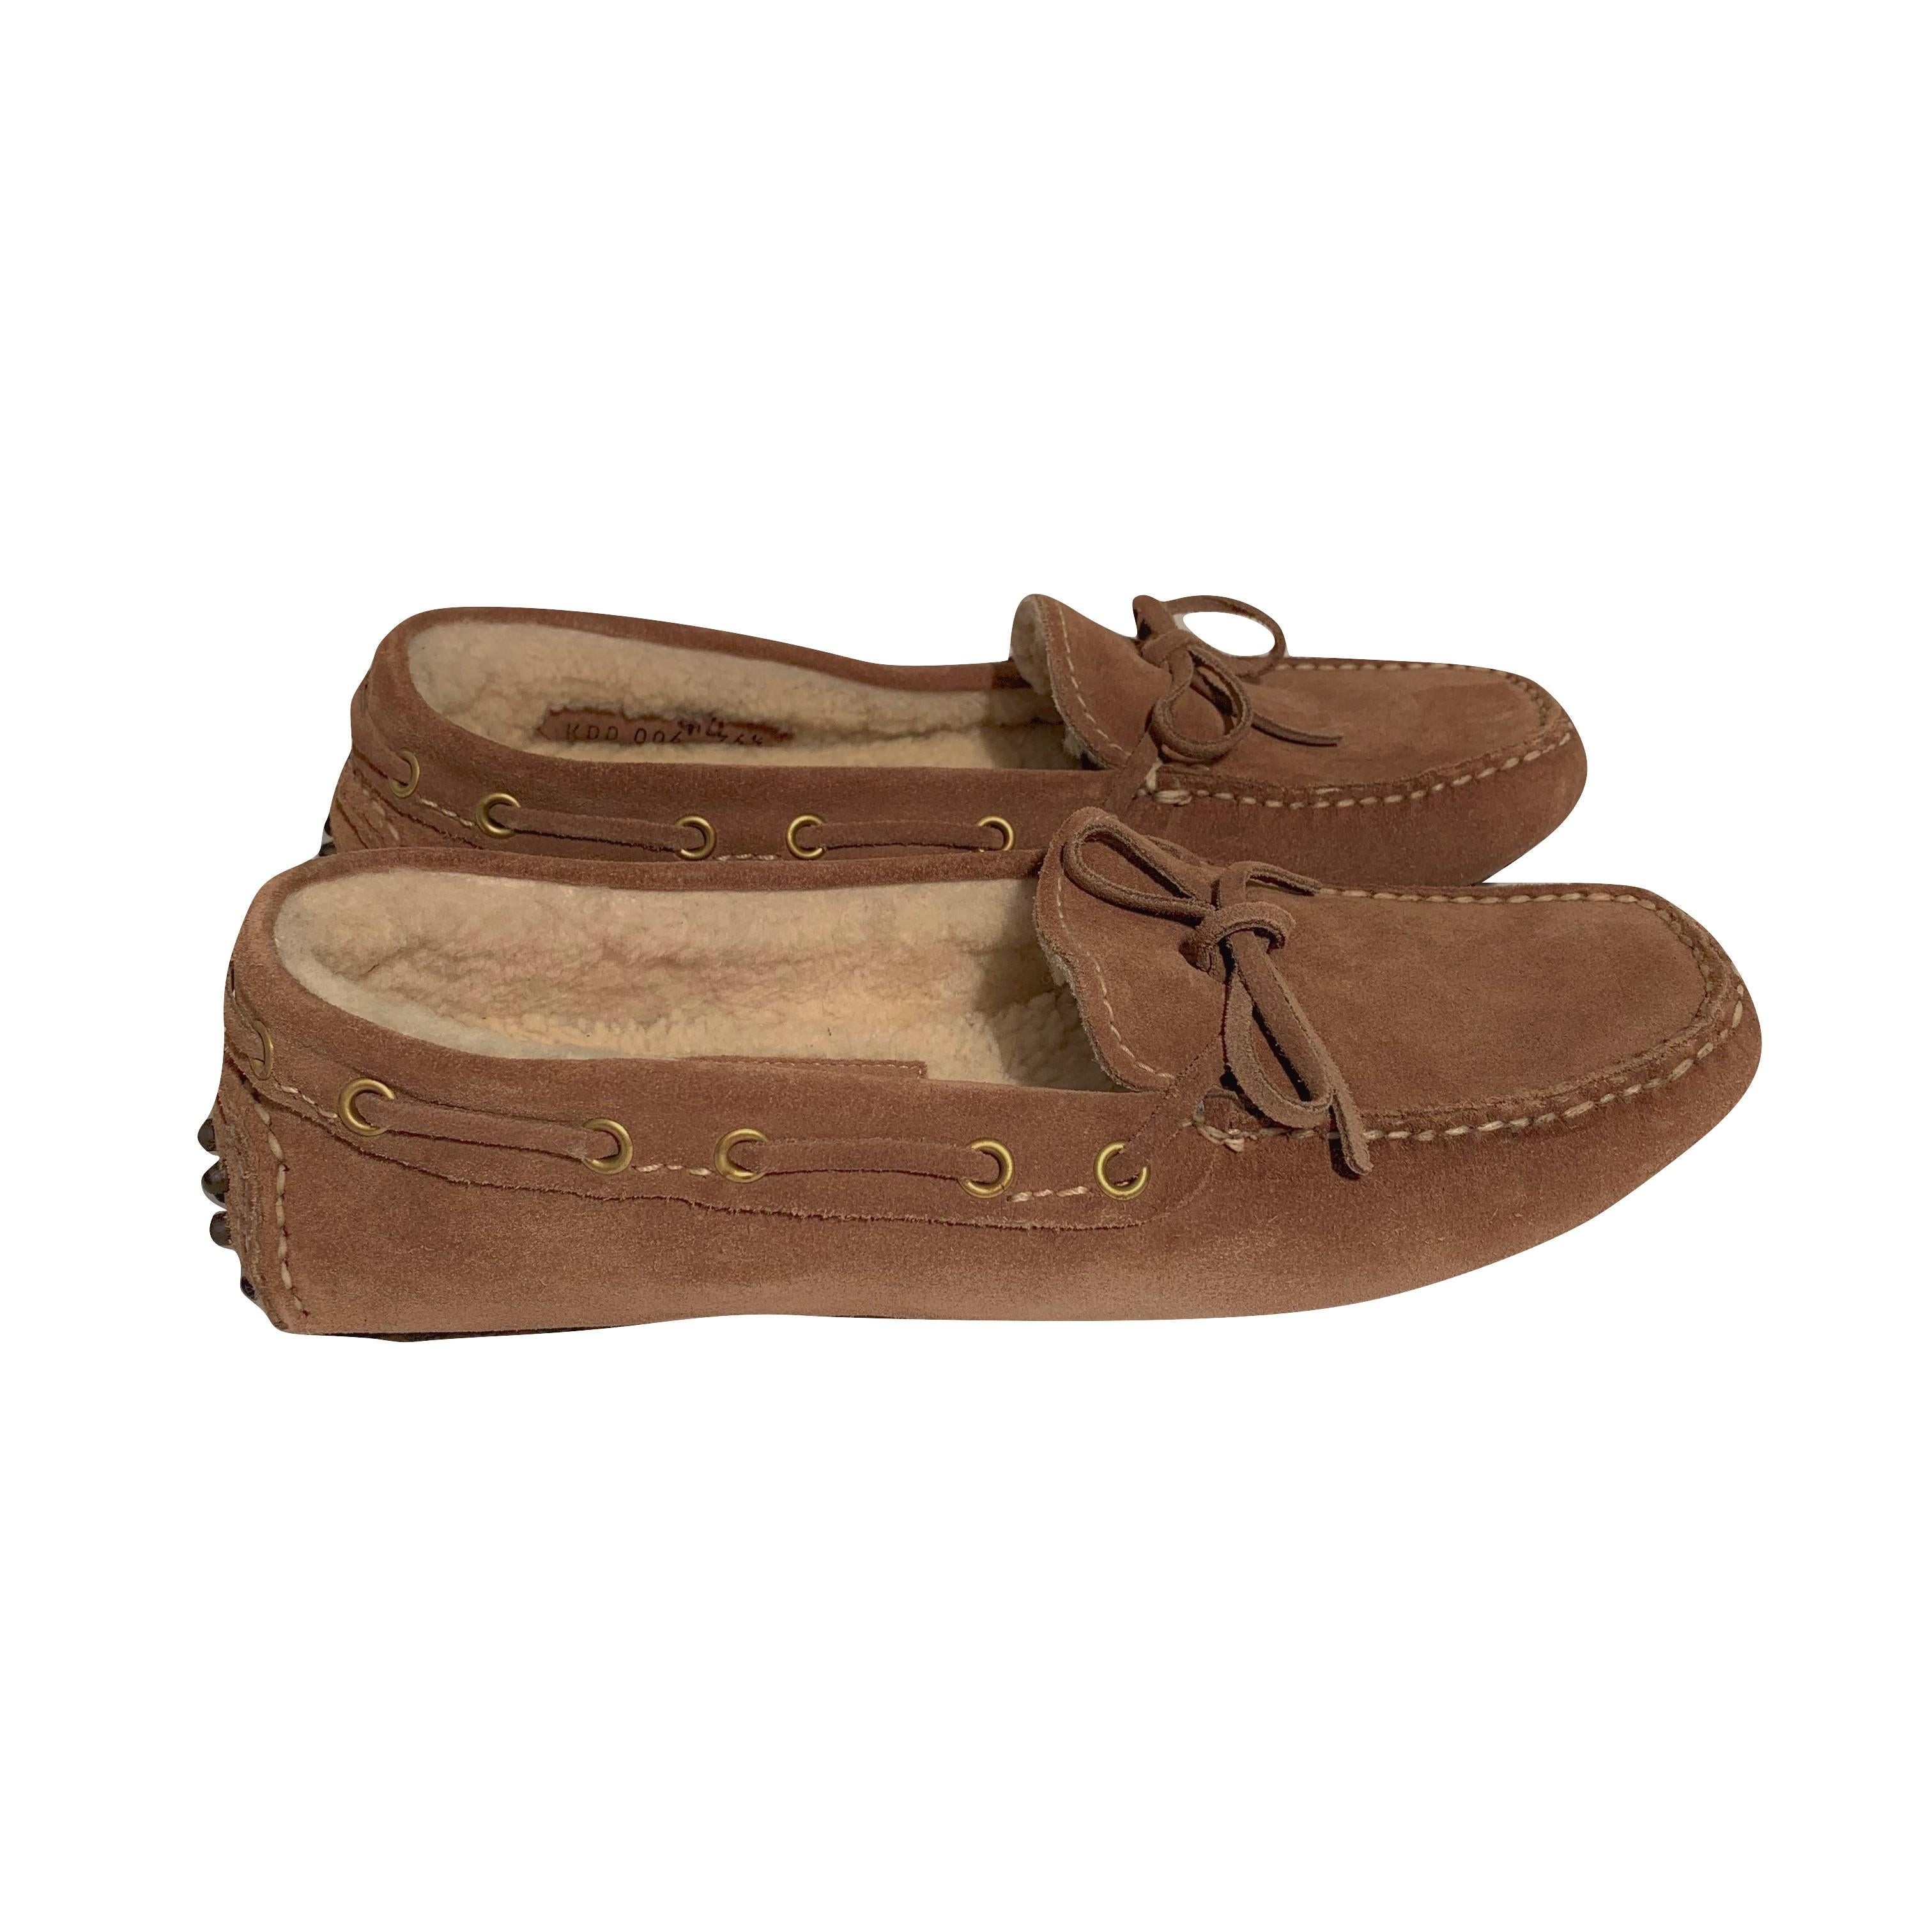  New The Original Prada Car Shoe Flat Moccasin Shearling House Driving  Sz 36.5 In New Condition In Leesburg, VA